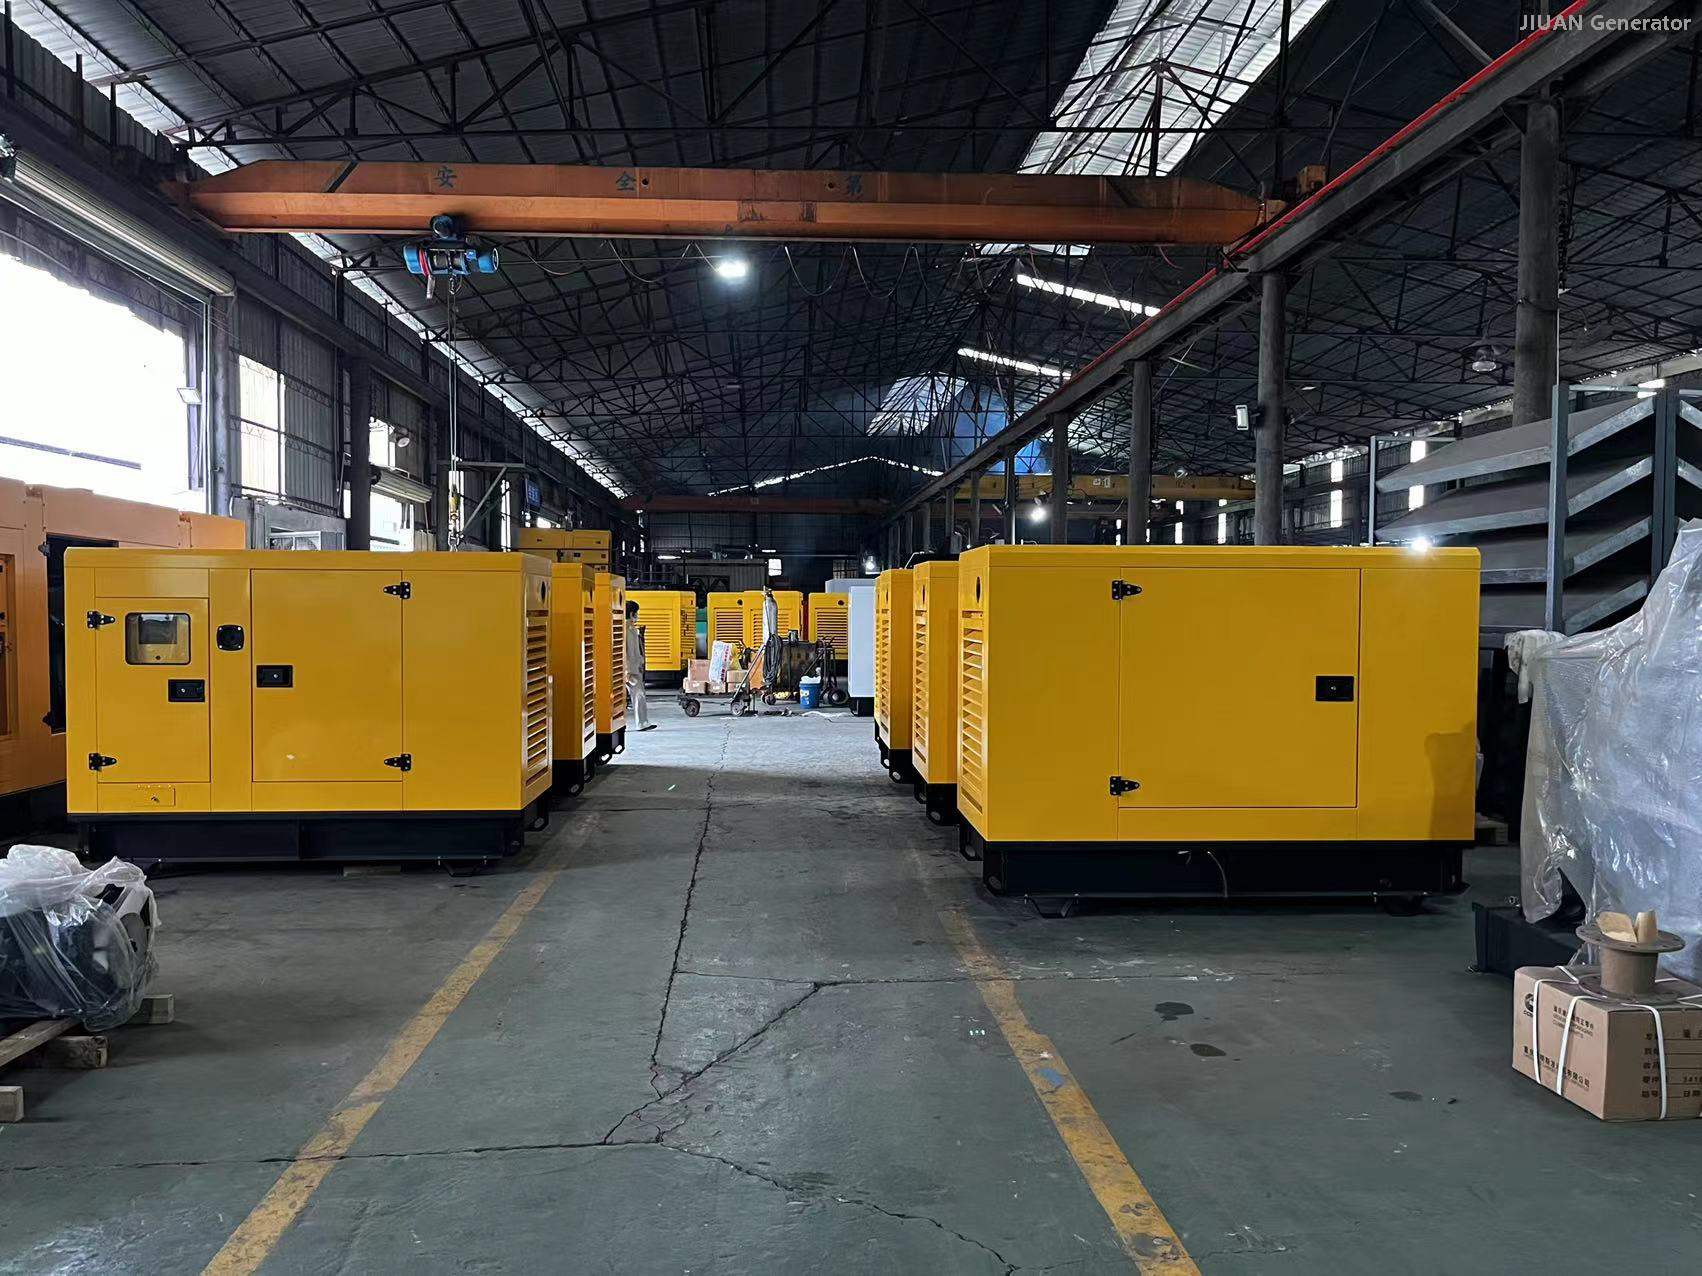 6M33D725E310 750KVA 600KW powered by WEICHAI engine diesel electrical power industrial generator Guangzhou